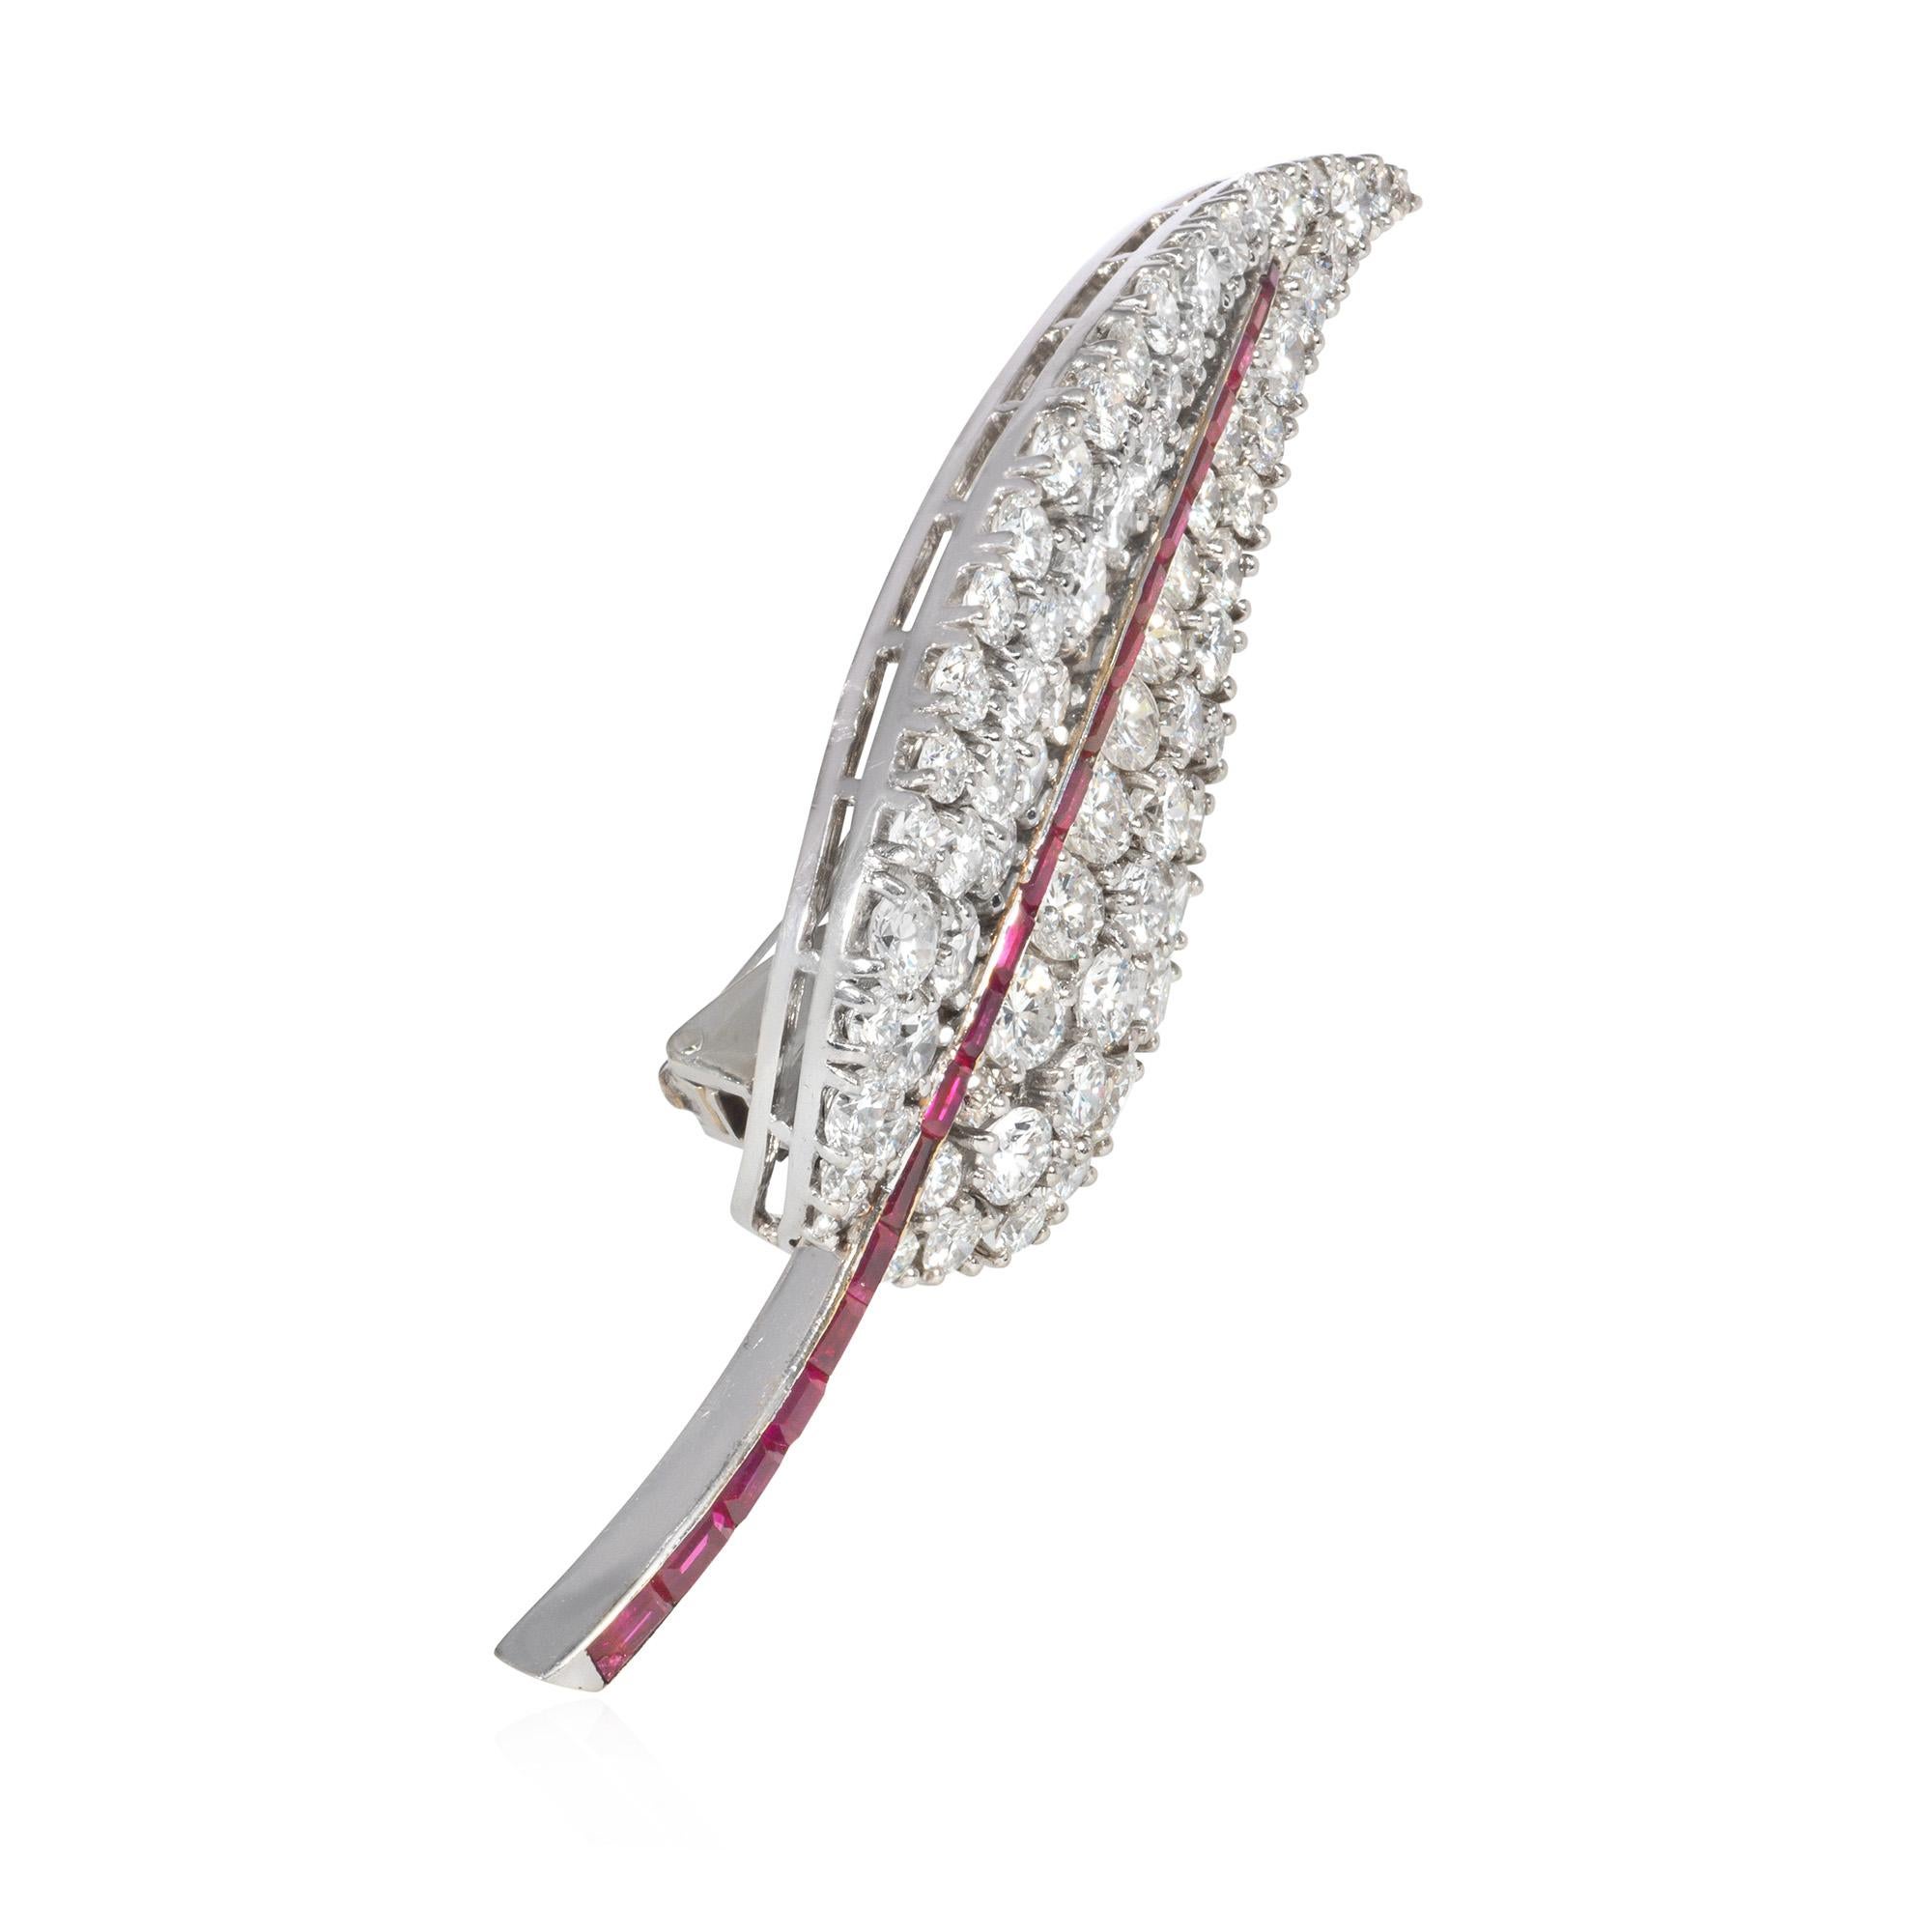 Baguette Cut French 1950s Diamond Leaf Brooch with Interchangeable Multi-Gem Spine Inserts